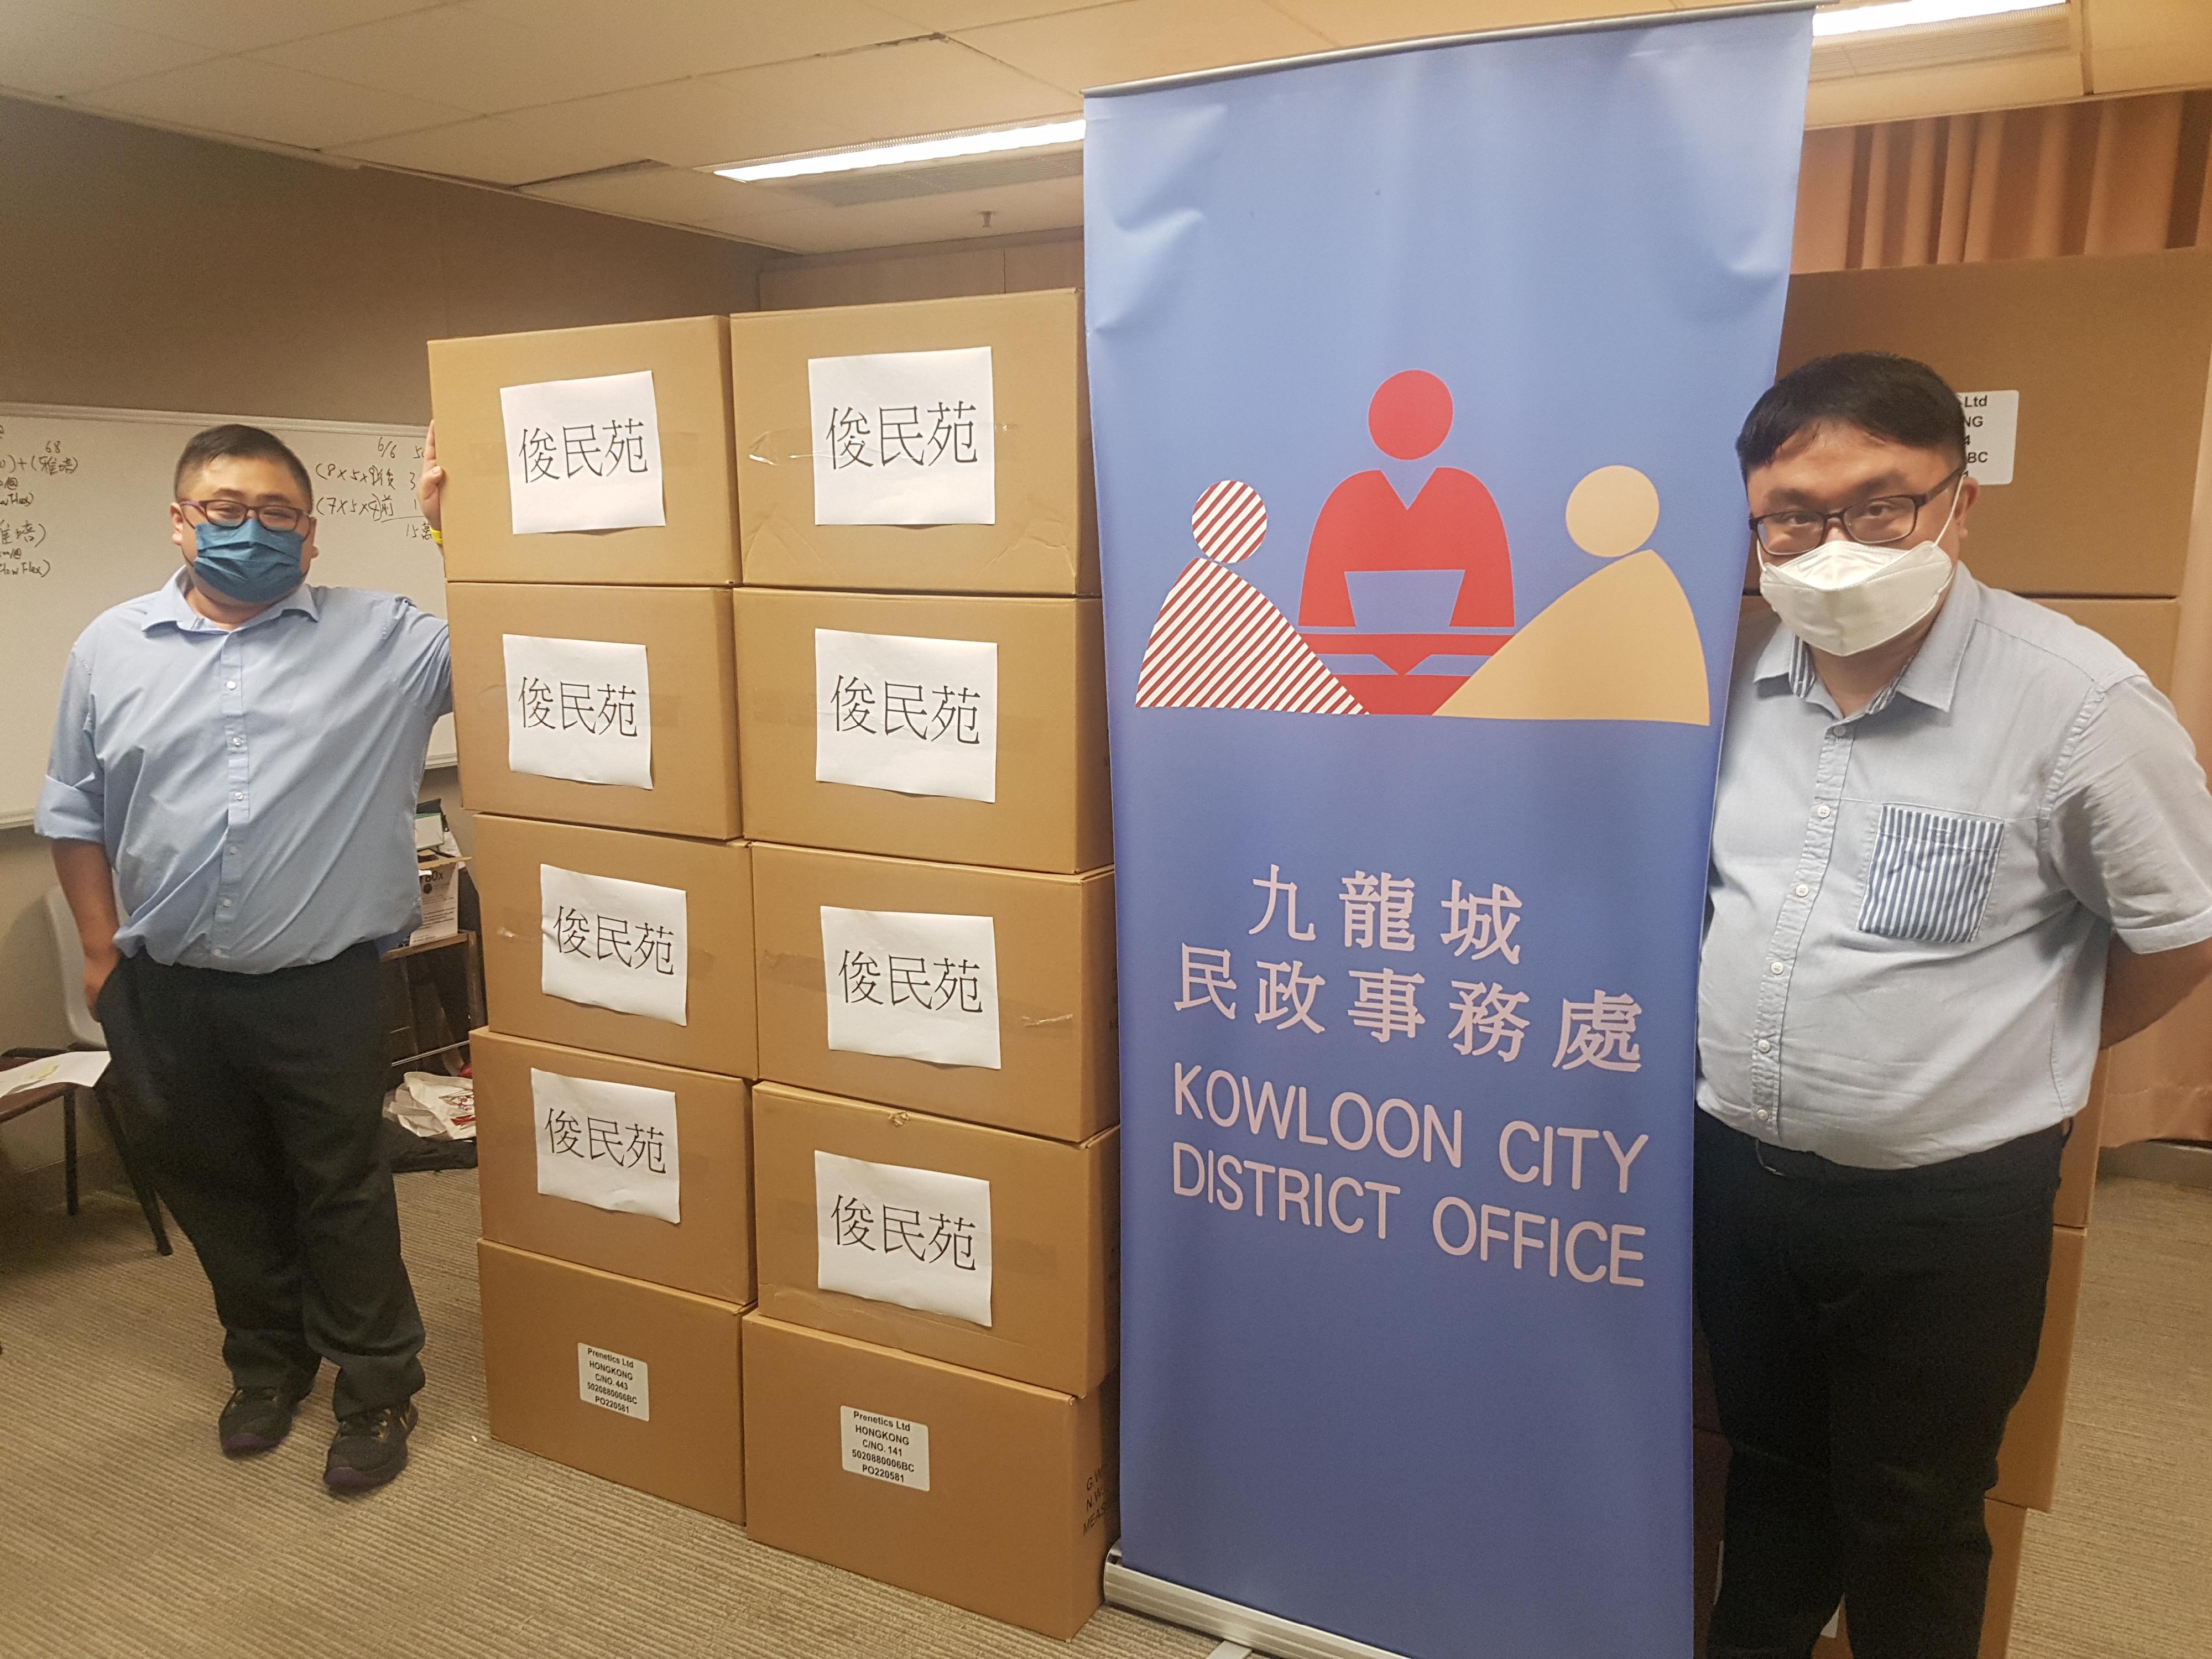 The Kowloon City District Office today (June 21) distributed COVID-19 rapid test kits to households, cleansing workers and property management staff living and working in Chun Man Court for voluntary testing through the property management company.